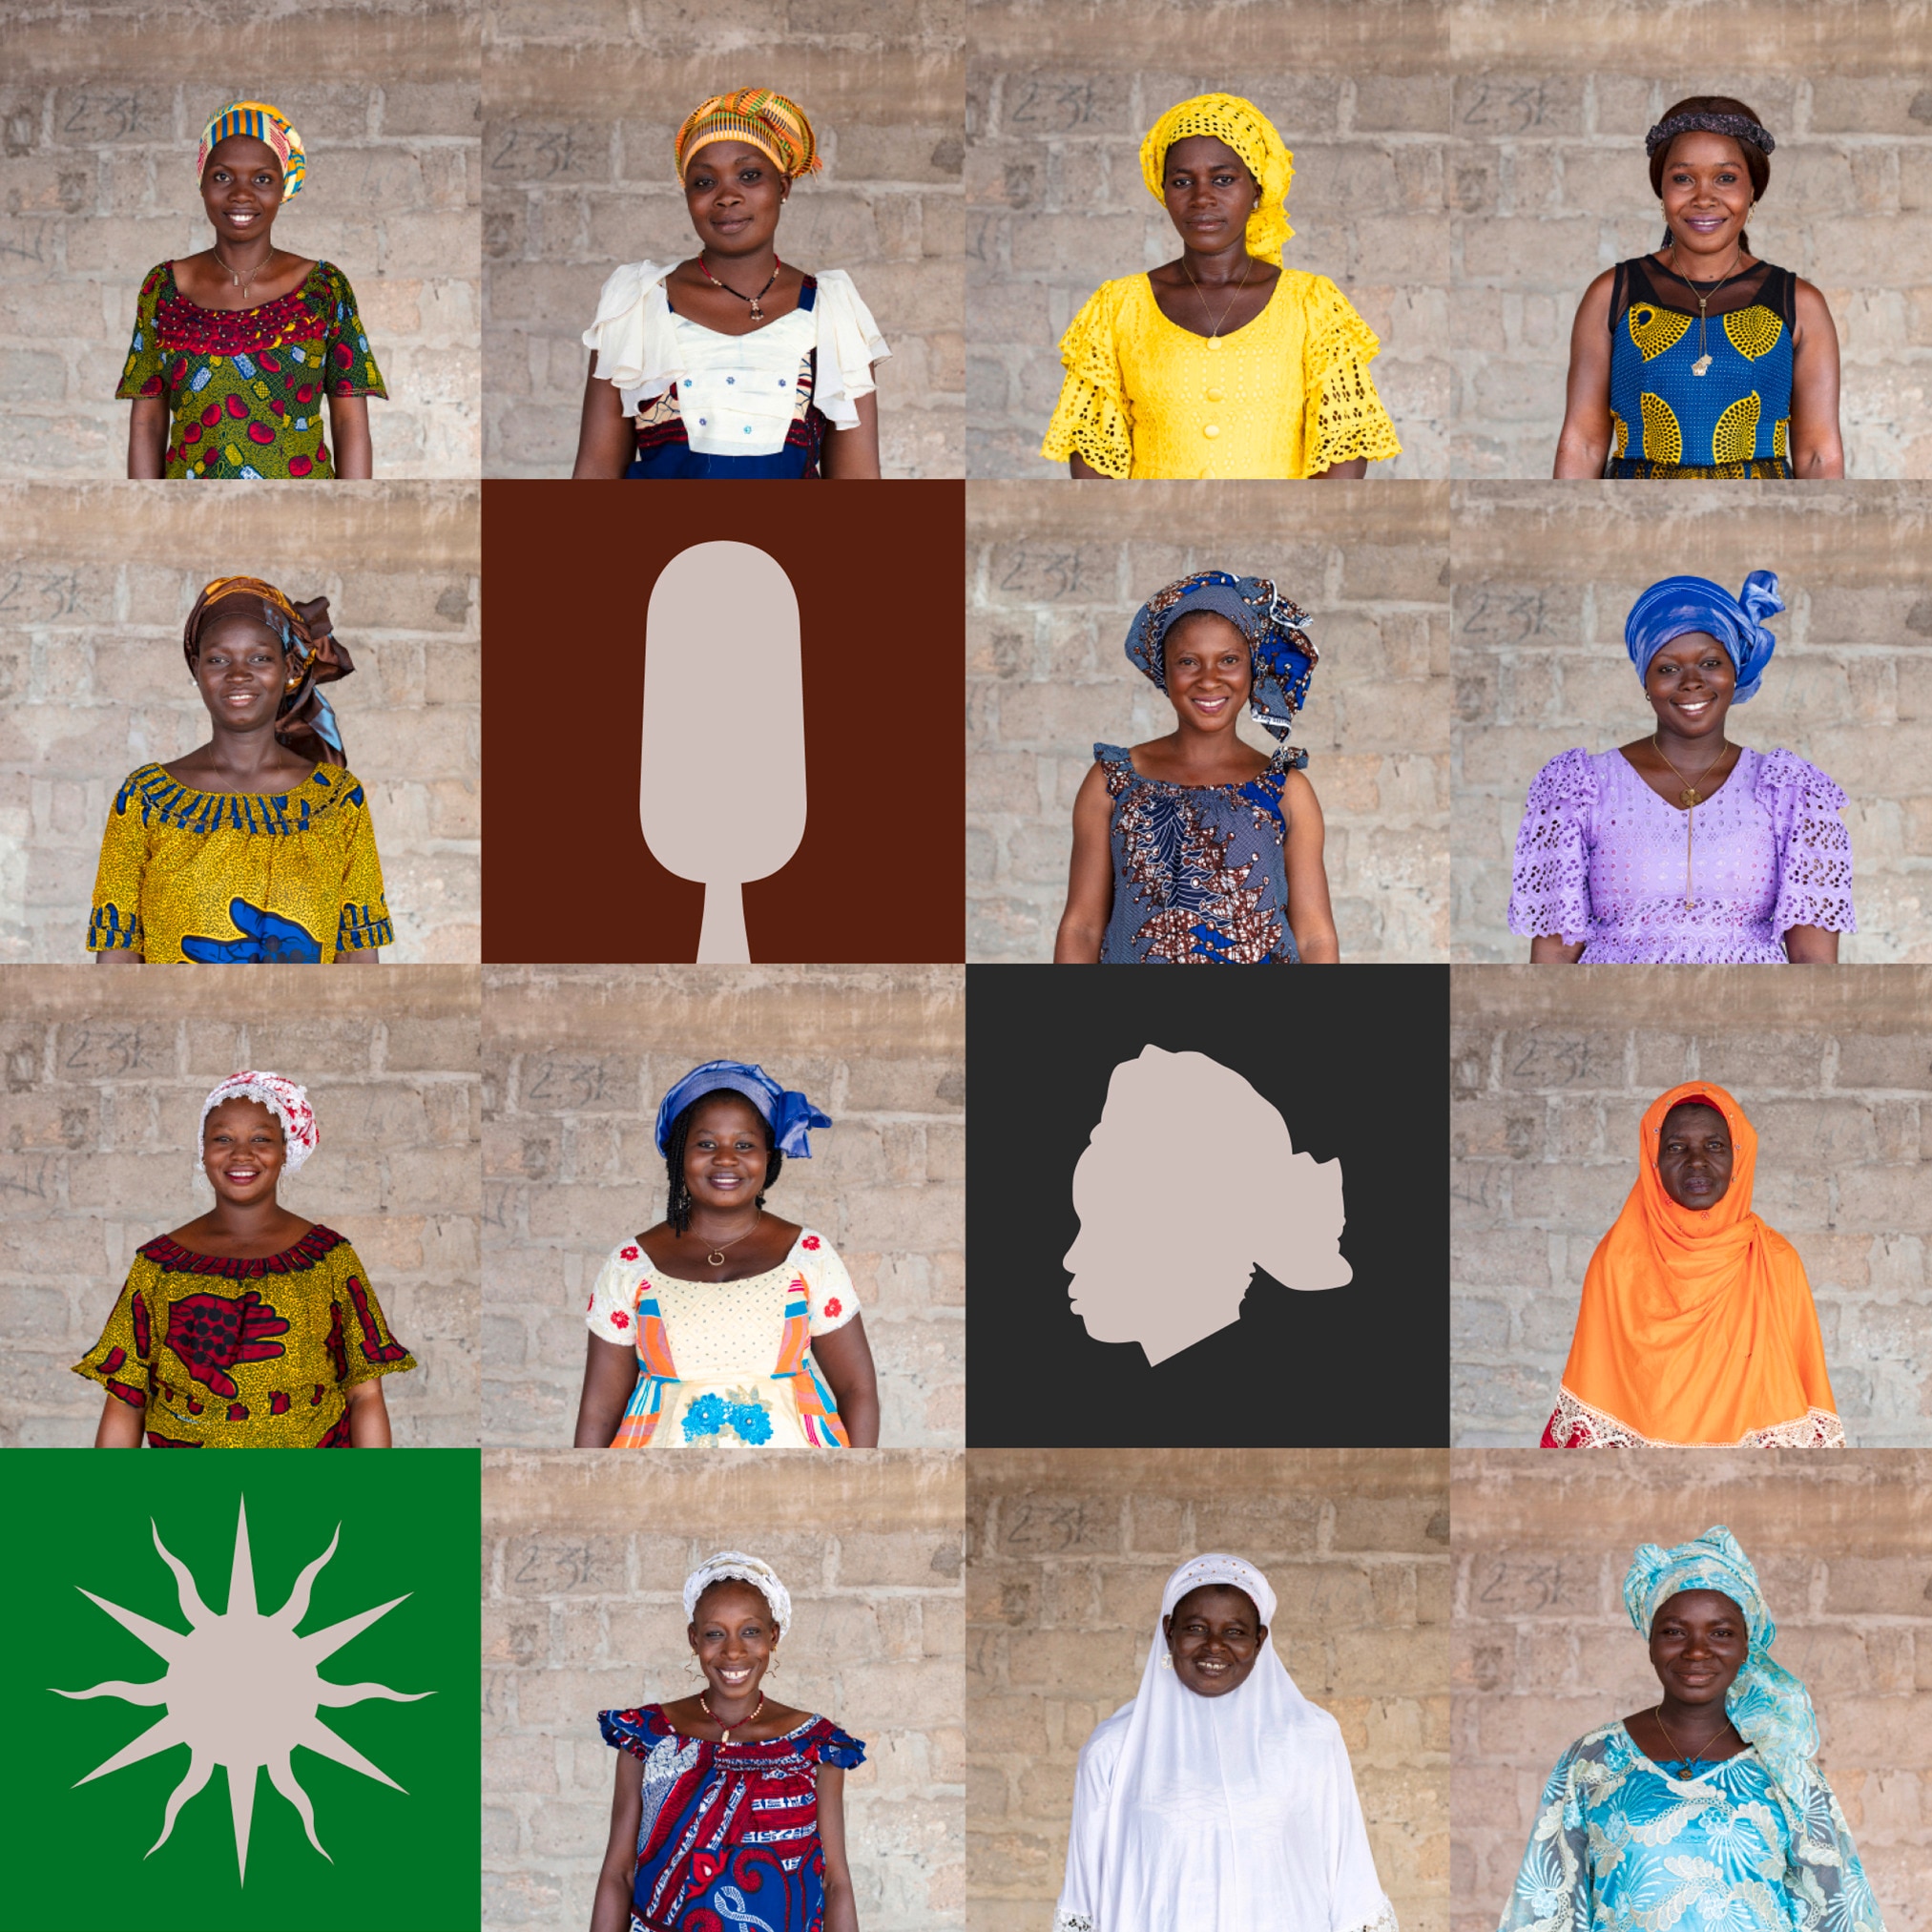 grid of 13 smiling african women portraits #7 - interspersed with a few colourful graphic square cut out illustrations